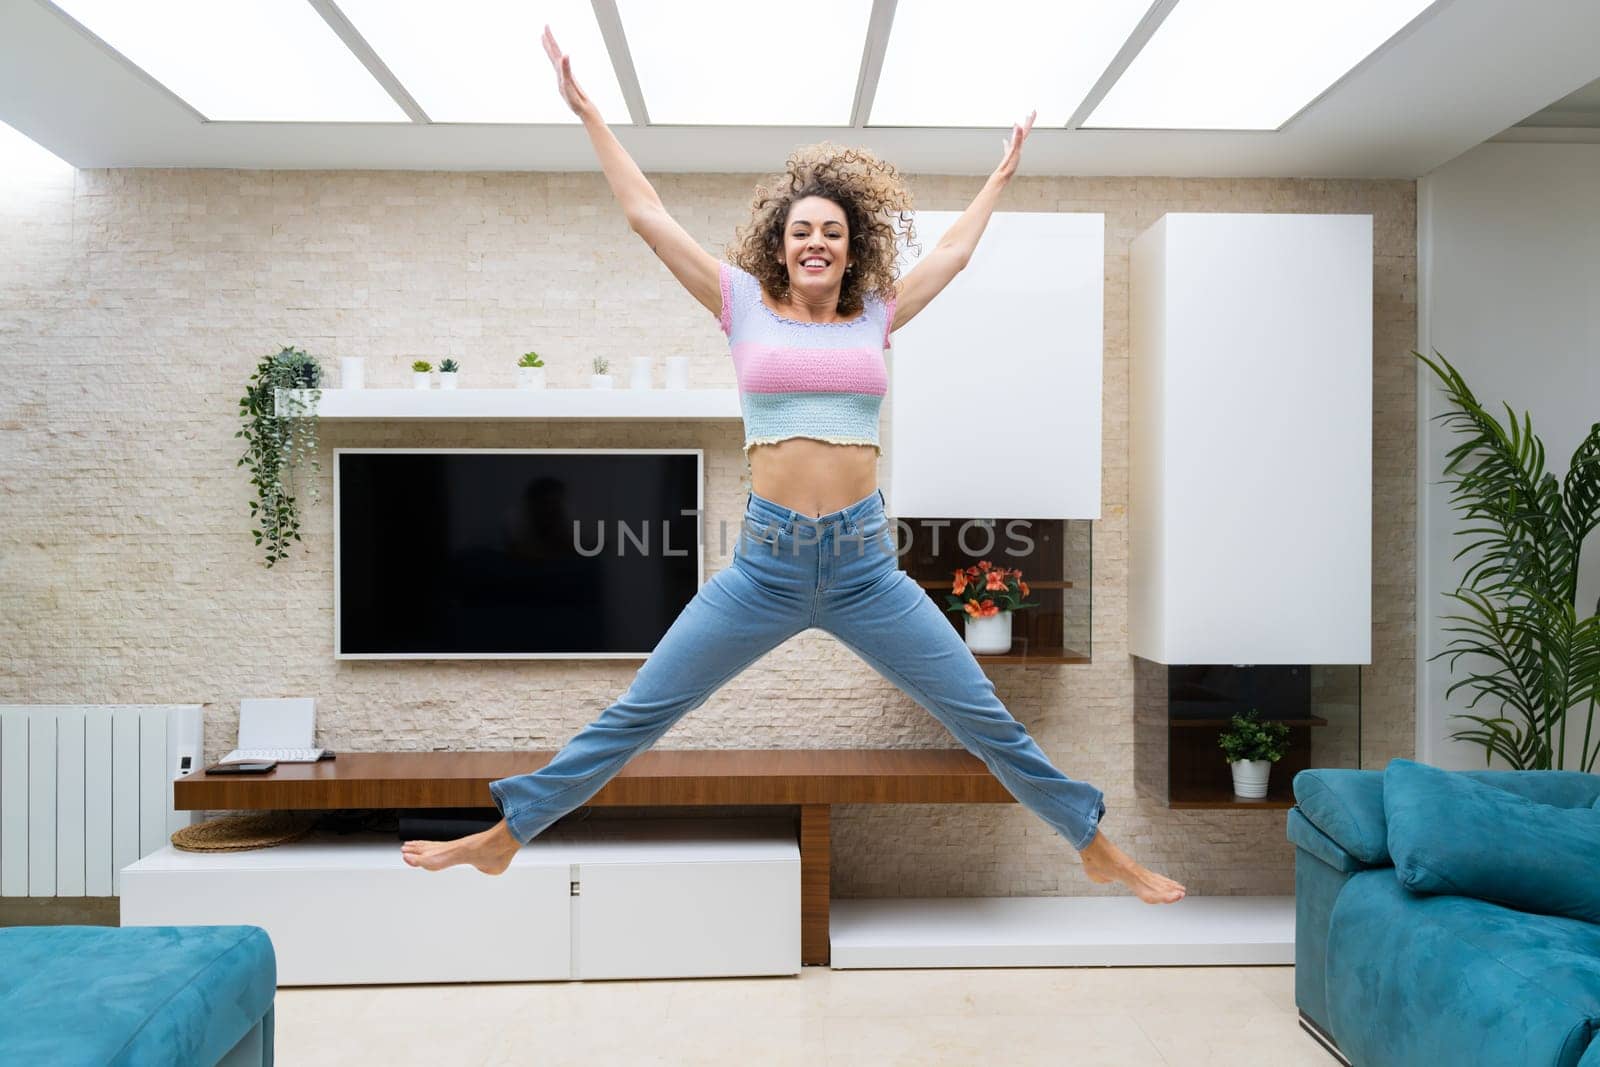 Excited young female with curly hair in casual clothes jumping above ground and raising arms while having fun at home